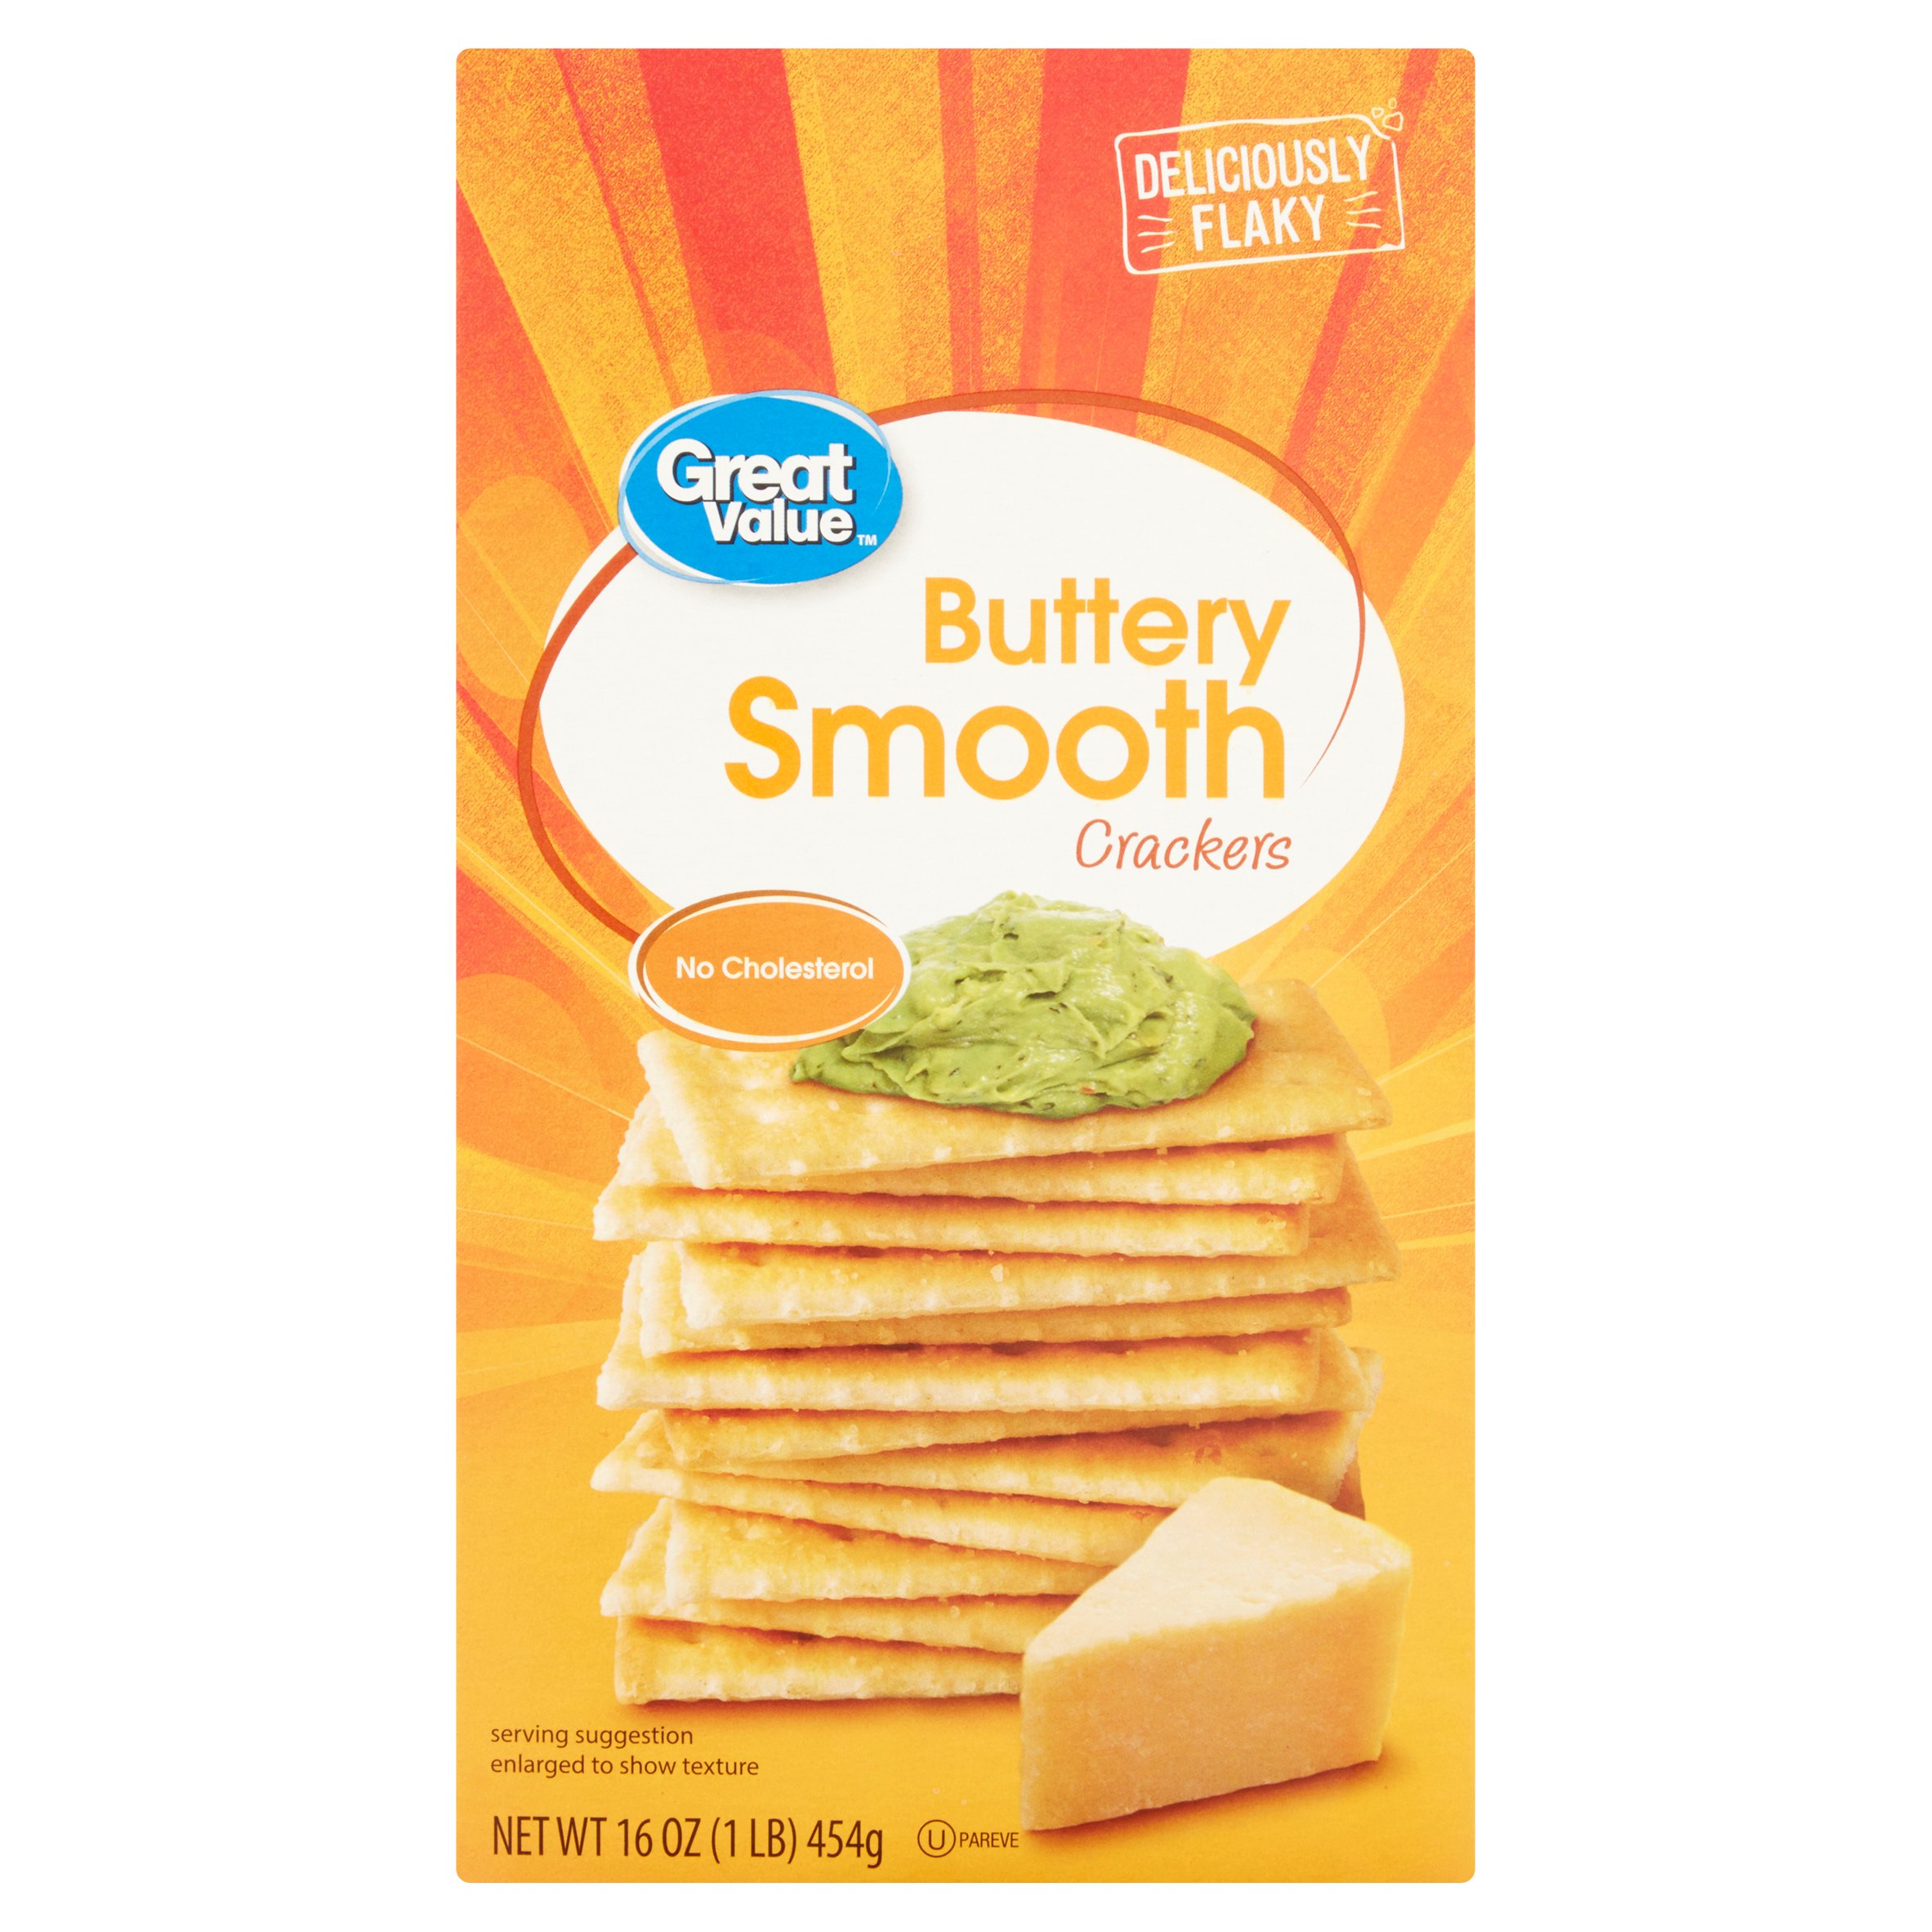 Great Value Buttery Smooth Crackers, 16 Oz. Image